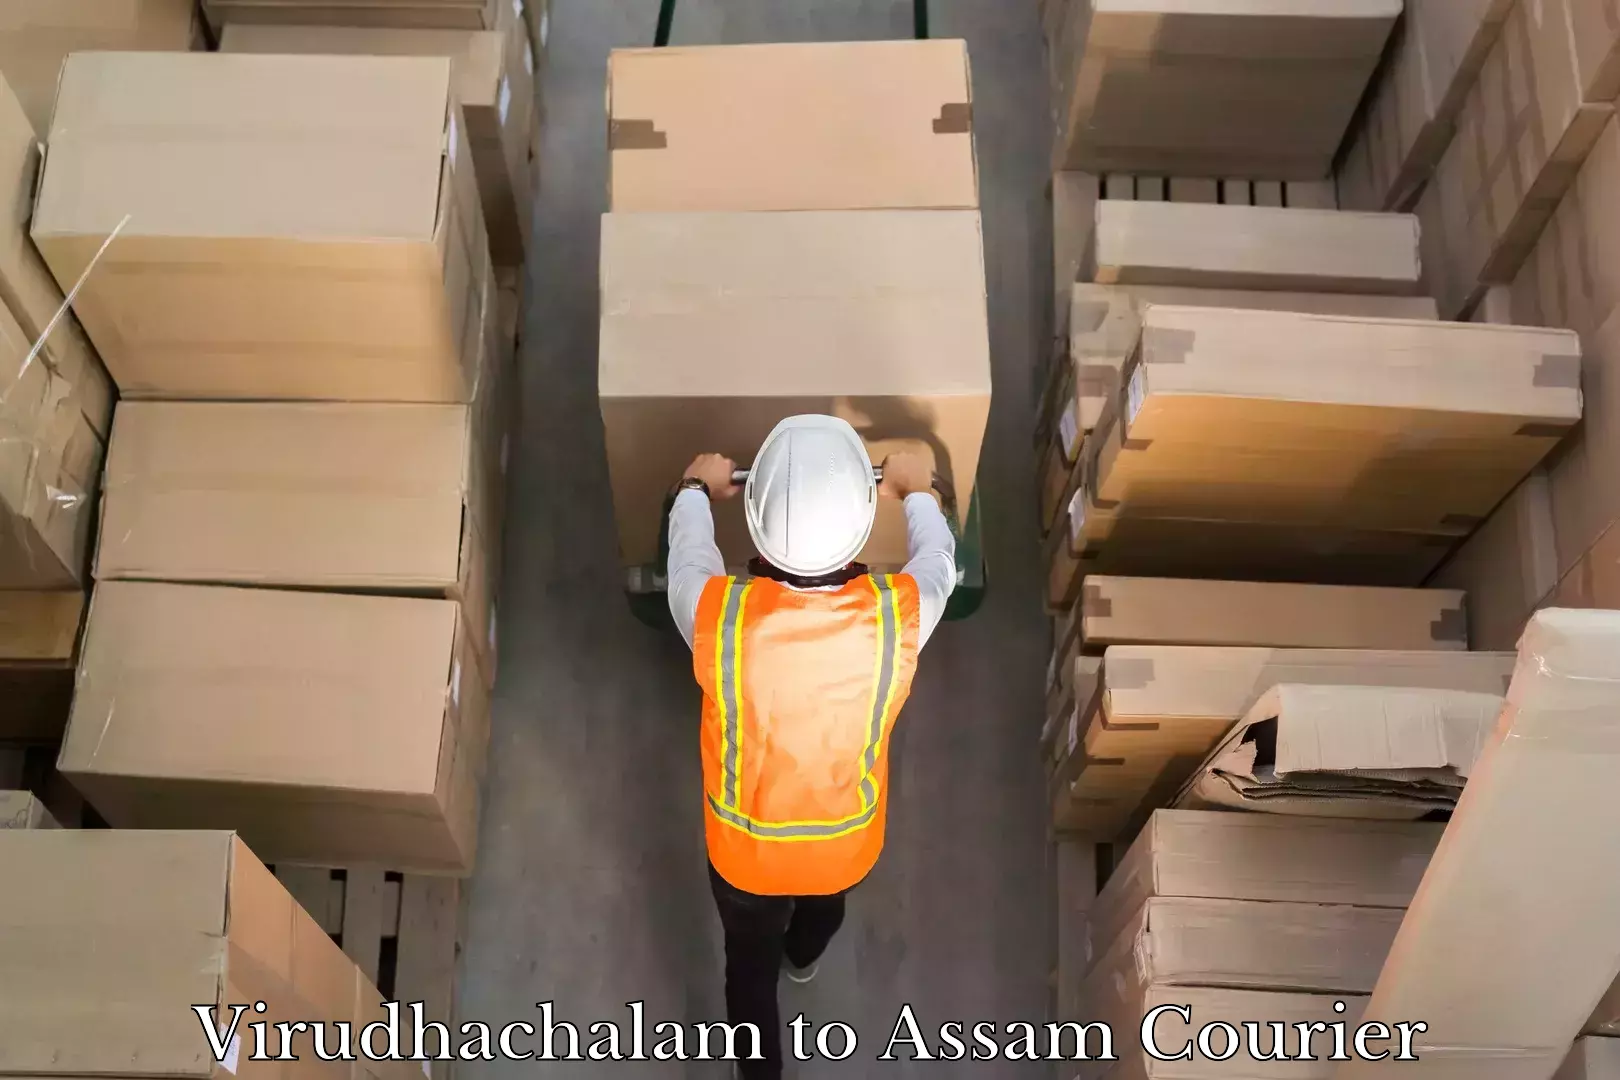 Reliable courier service in Virudhachalam to Assam